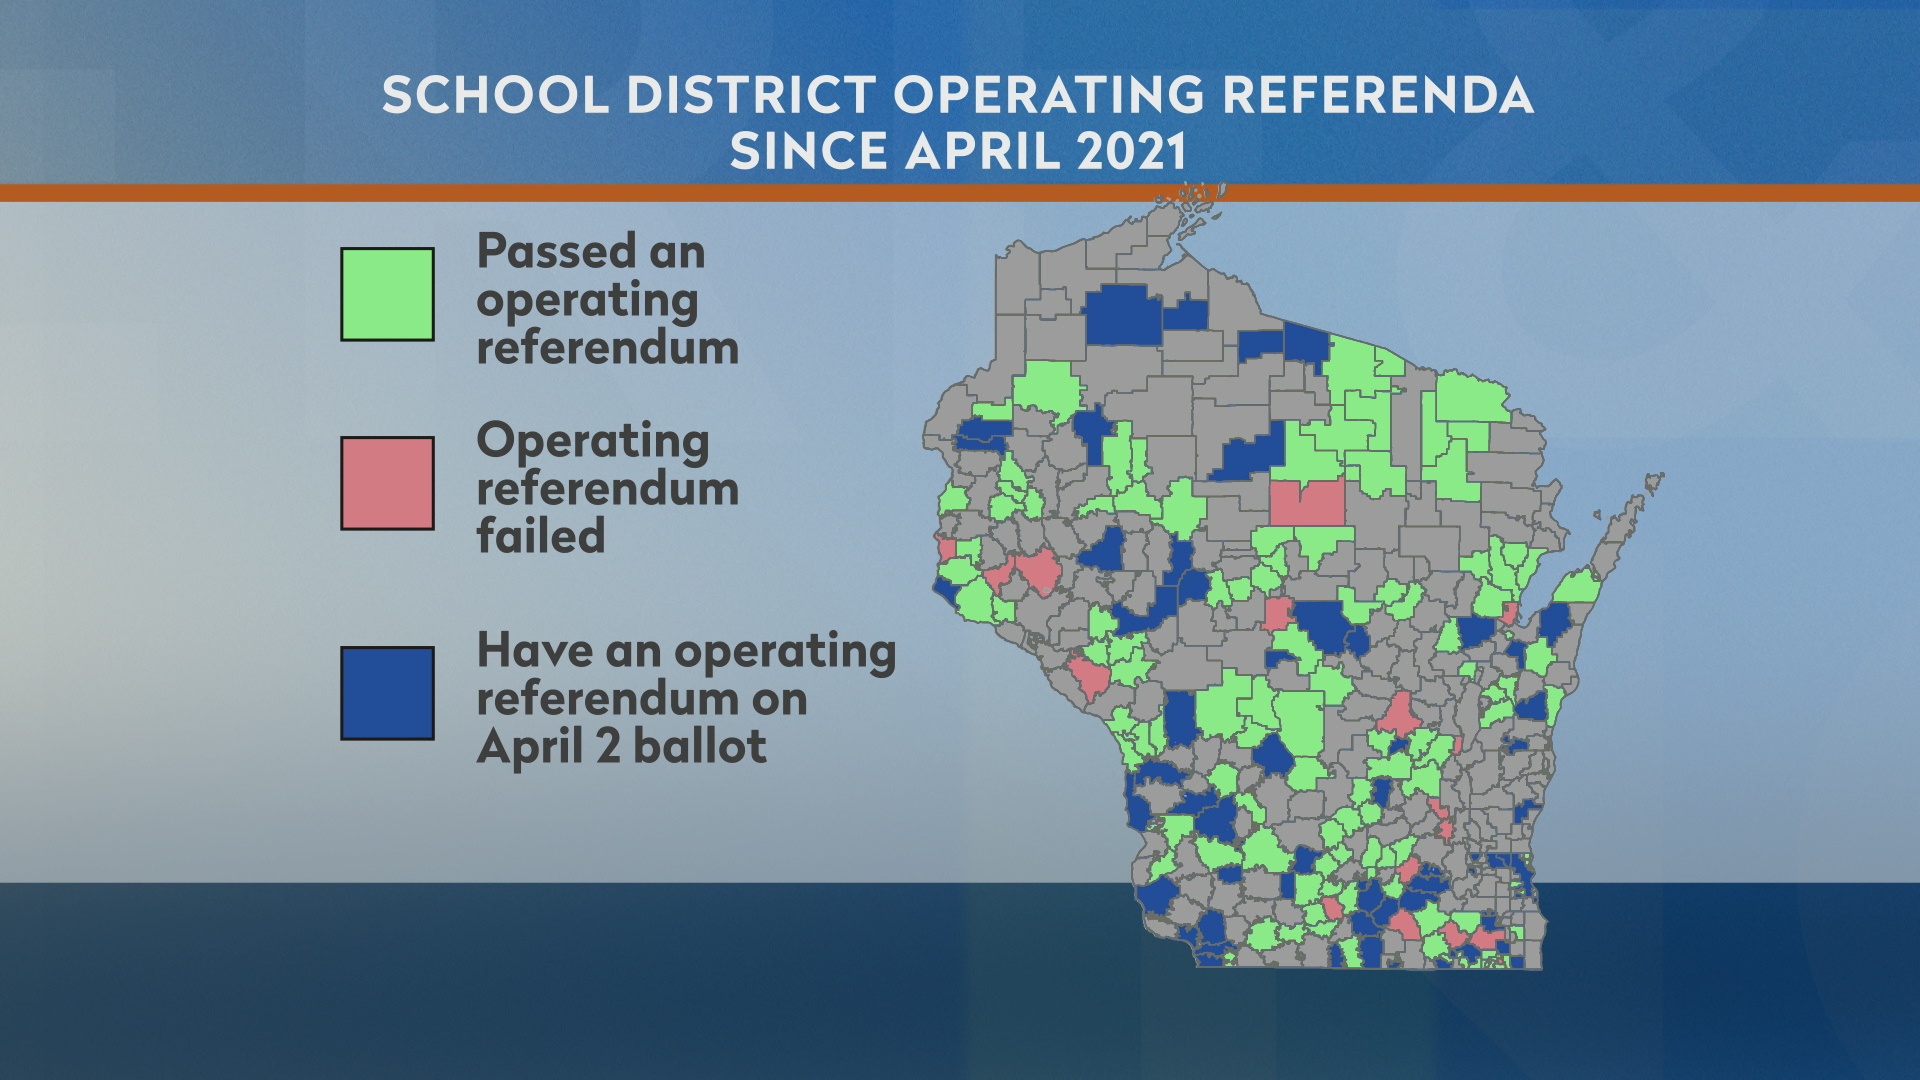 A map with the title "School District Operating Referenda Since April 2021" shows a county-level map of Wisconsin with a key showing different colors for "Passed an operating referendum," "Operating referendum failed" and "Have an operating referendum on April 2 ballot."